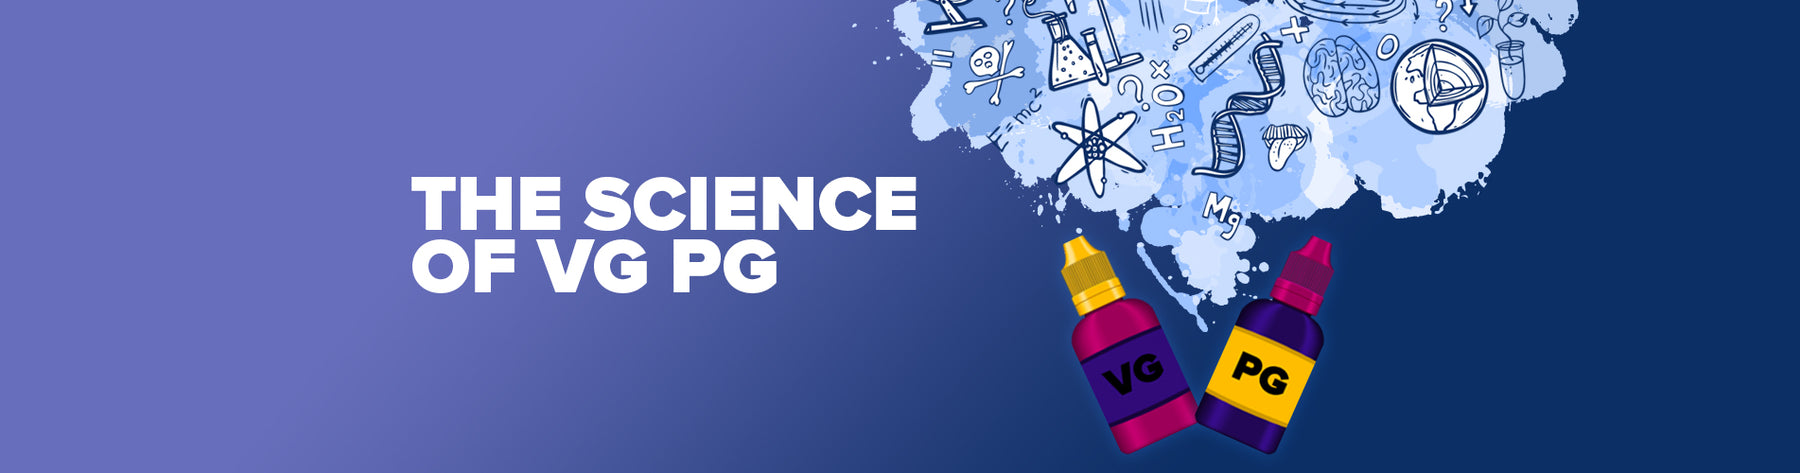 The Science of VG PG?